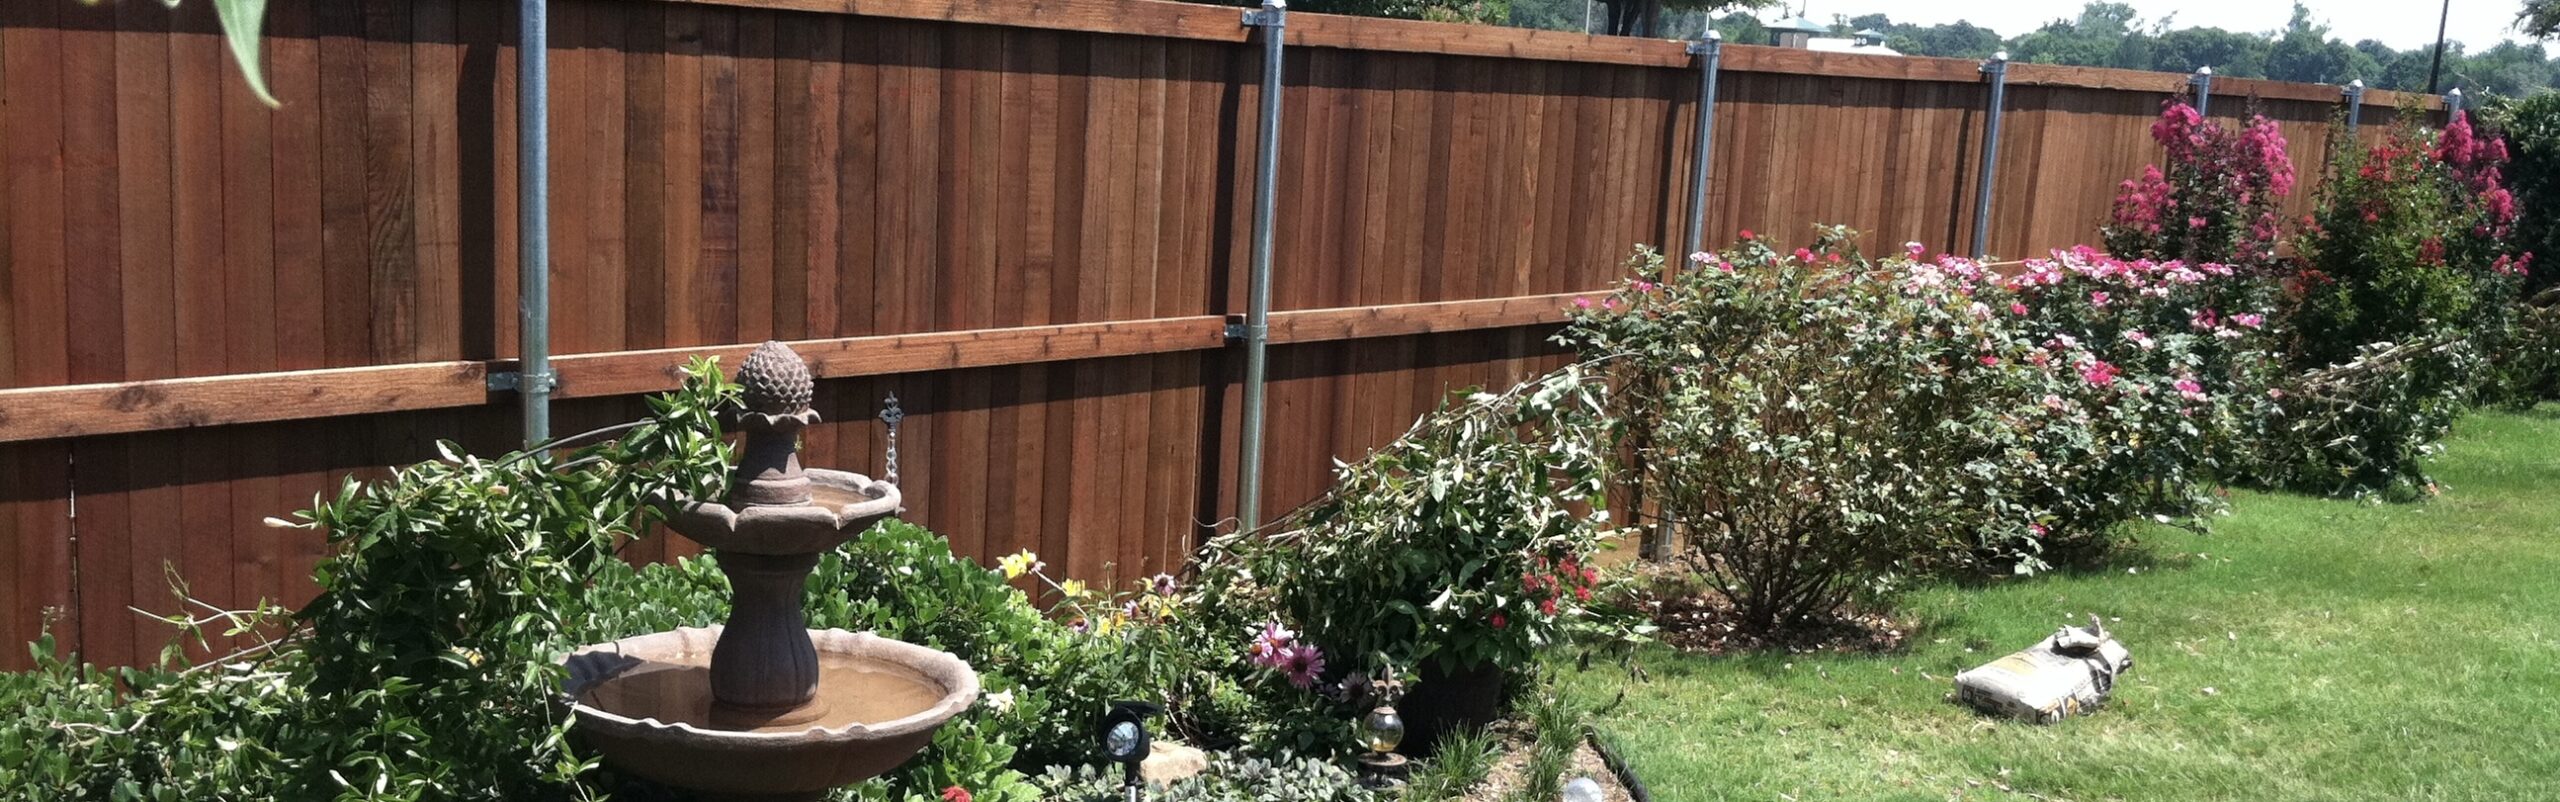 Fence Companies Fort Worth TX | Privacy Fences Wood Fences Wrought Iron Fences | Fort Worth Fence Companies